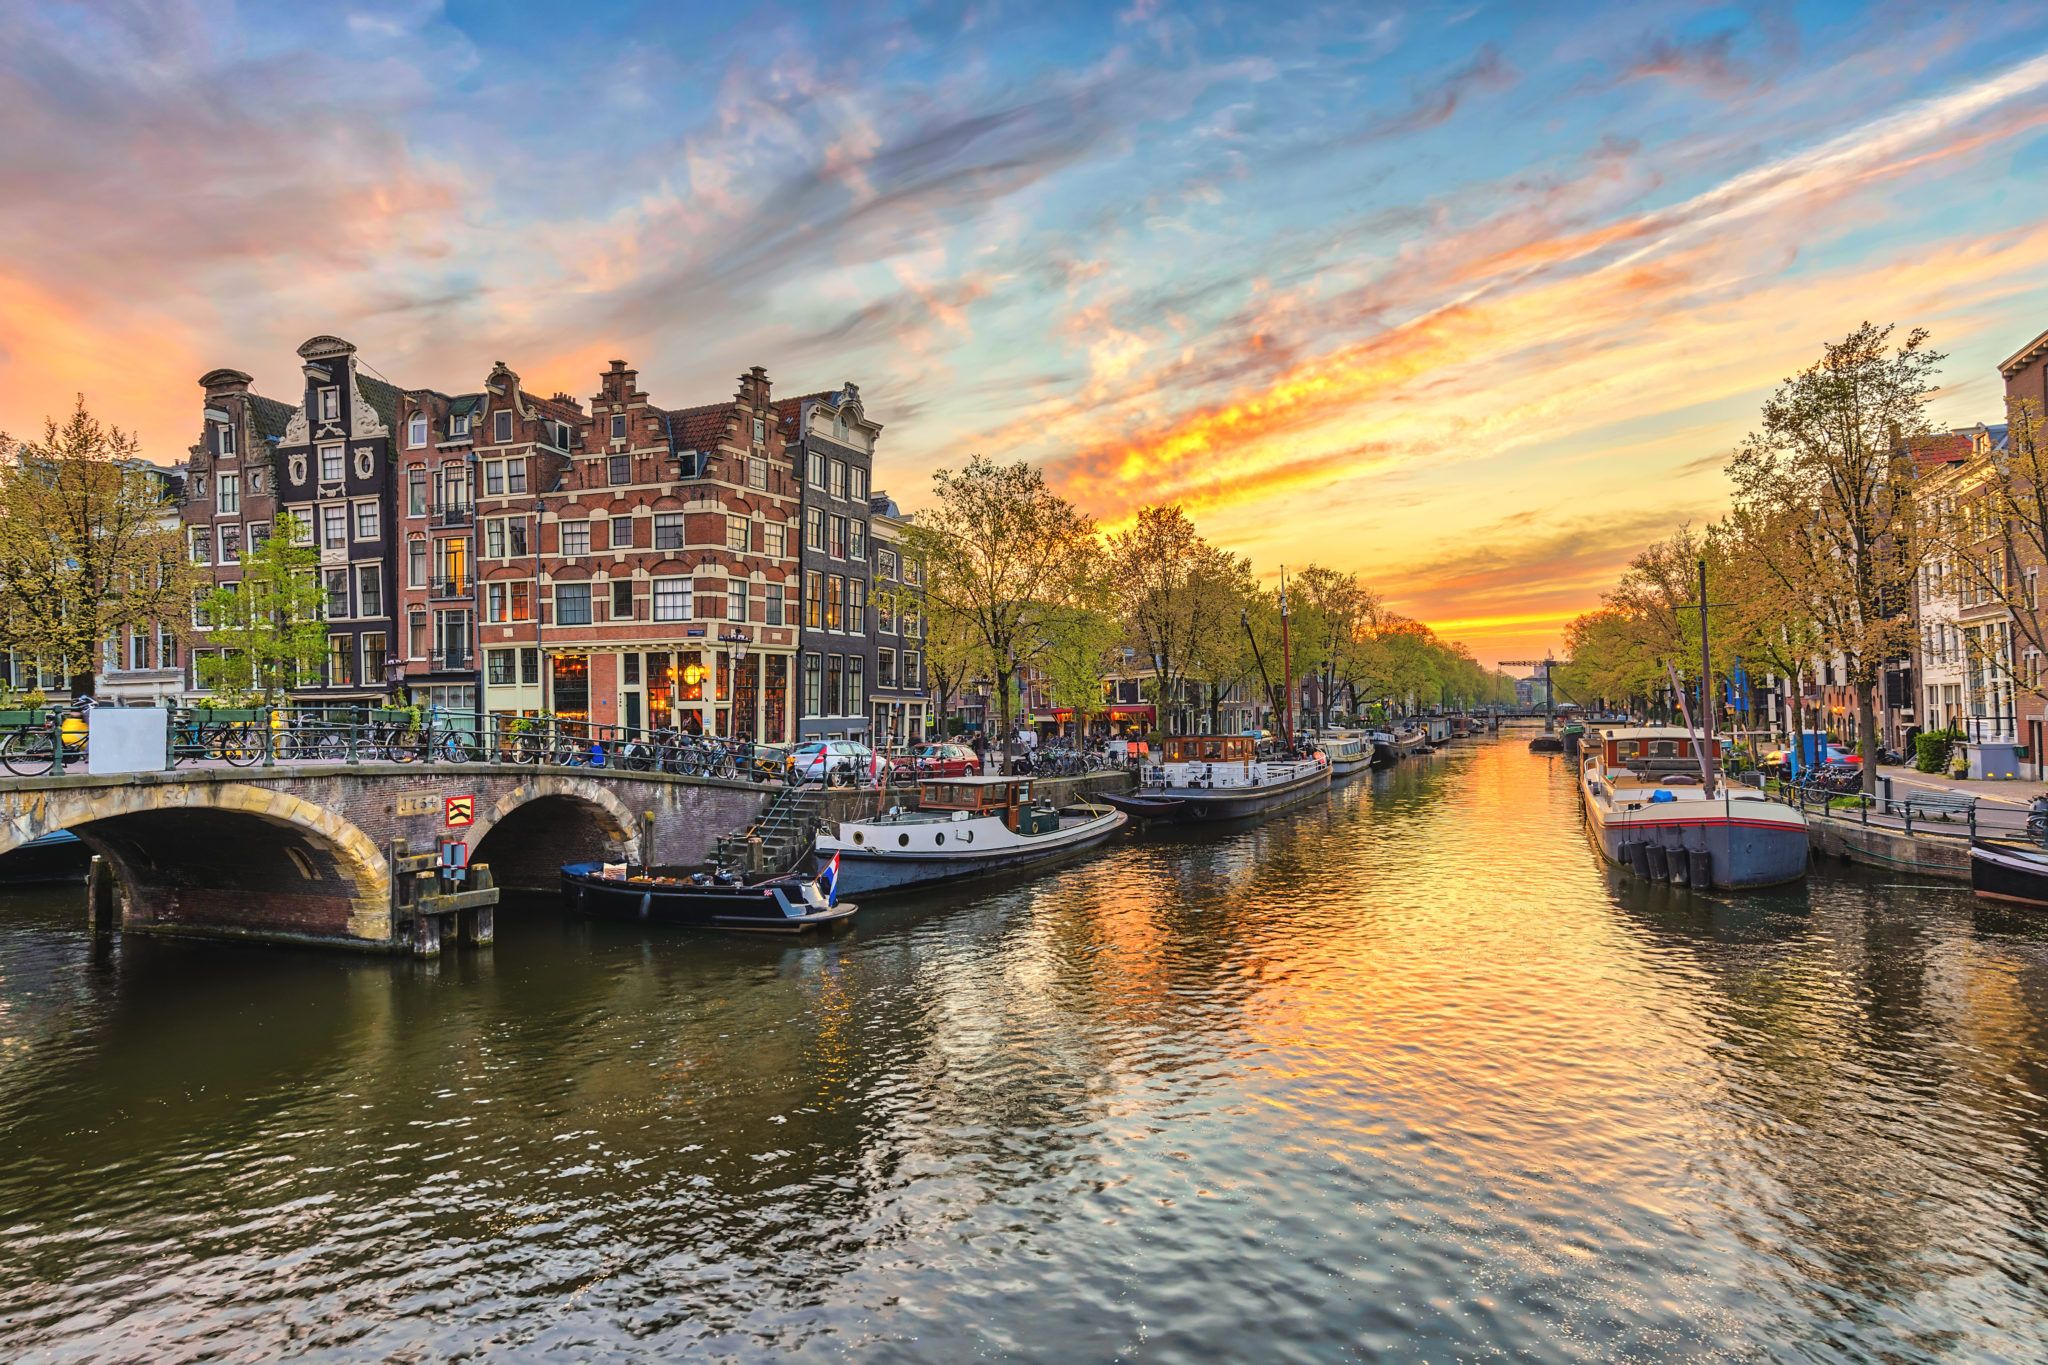 Photo of the Netherlands during sunset showing their canals